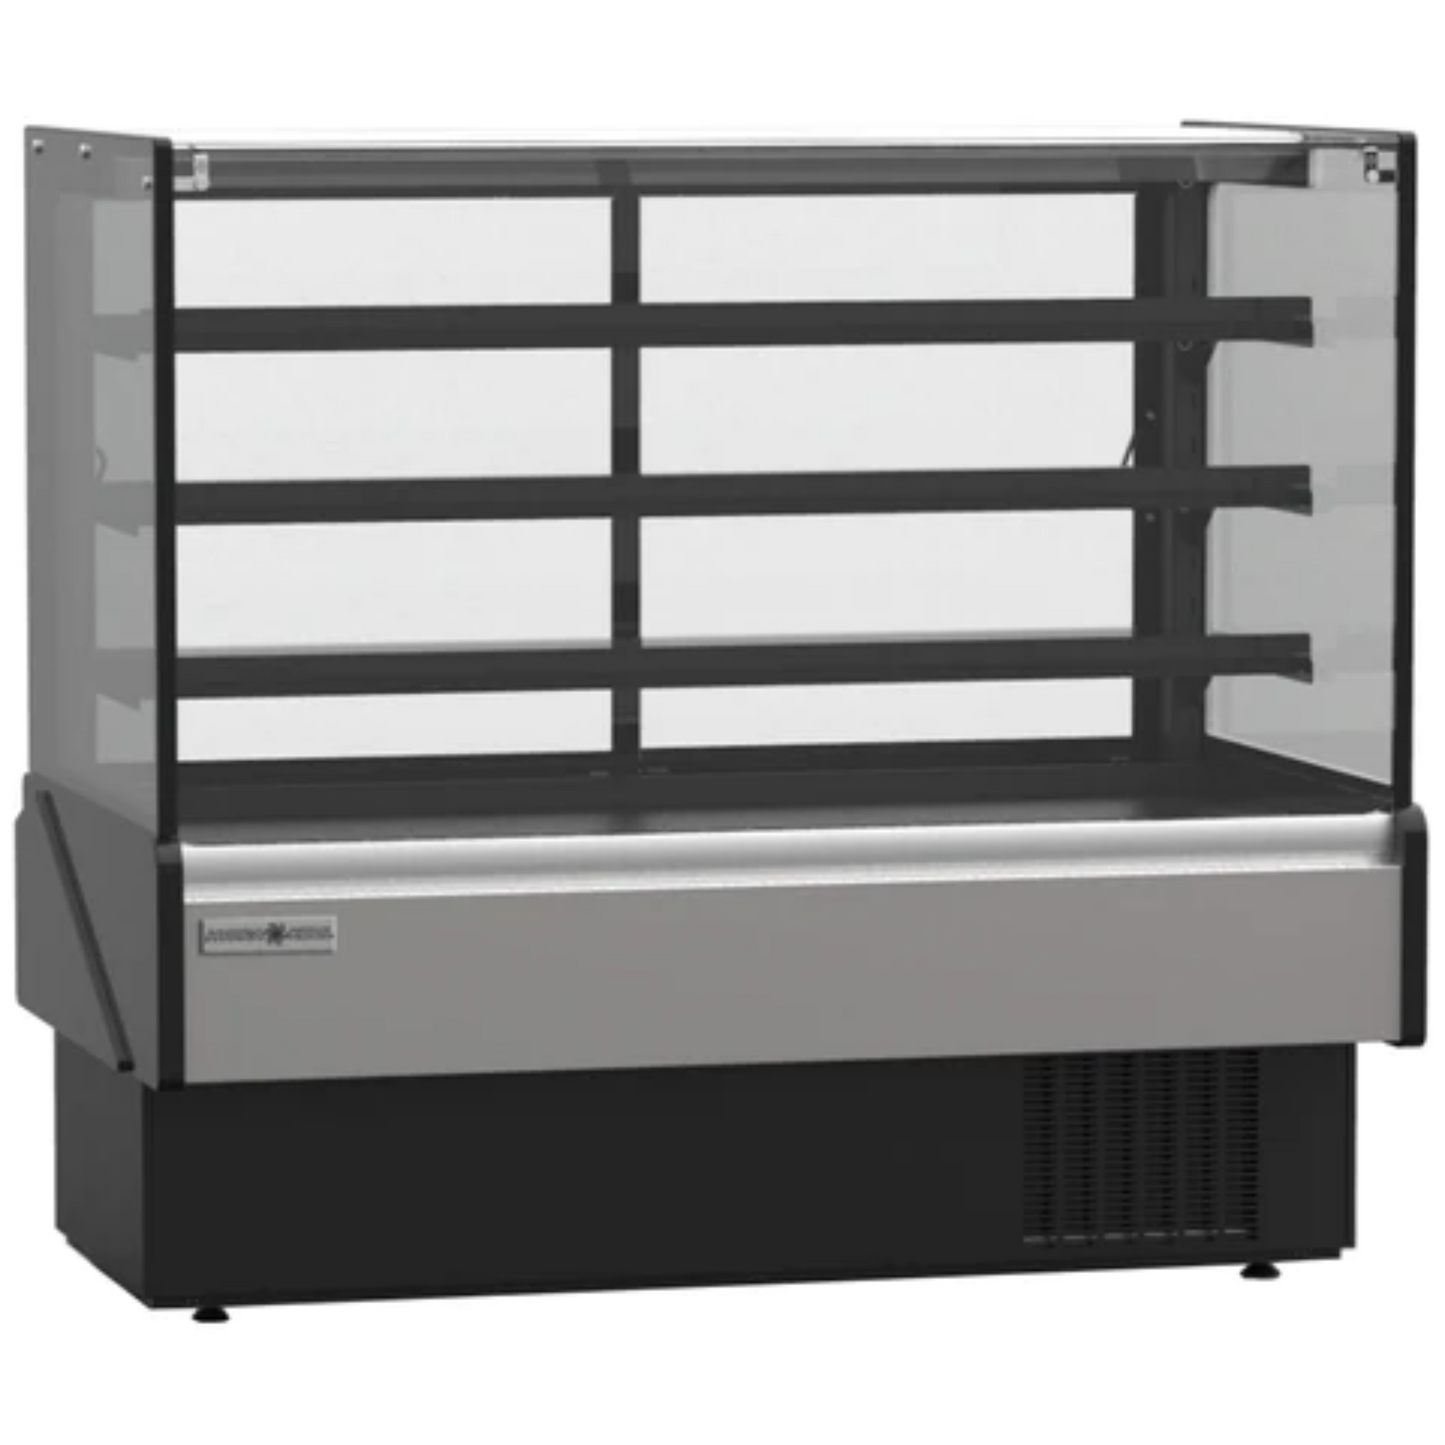 Hydra-Kool KBD-FG-50-S 50" Flat Glass Bakery Deli Case Self-Contained